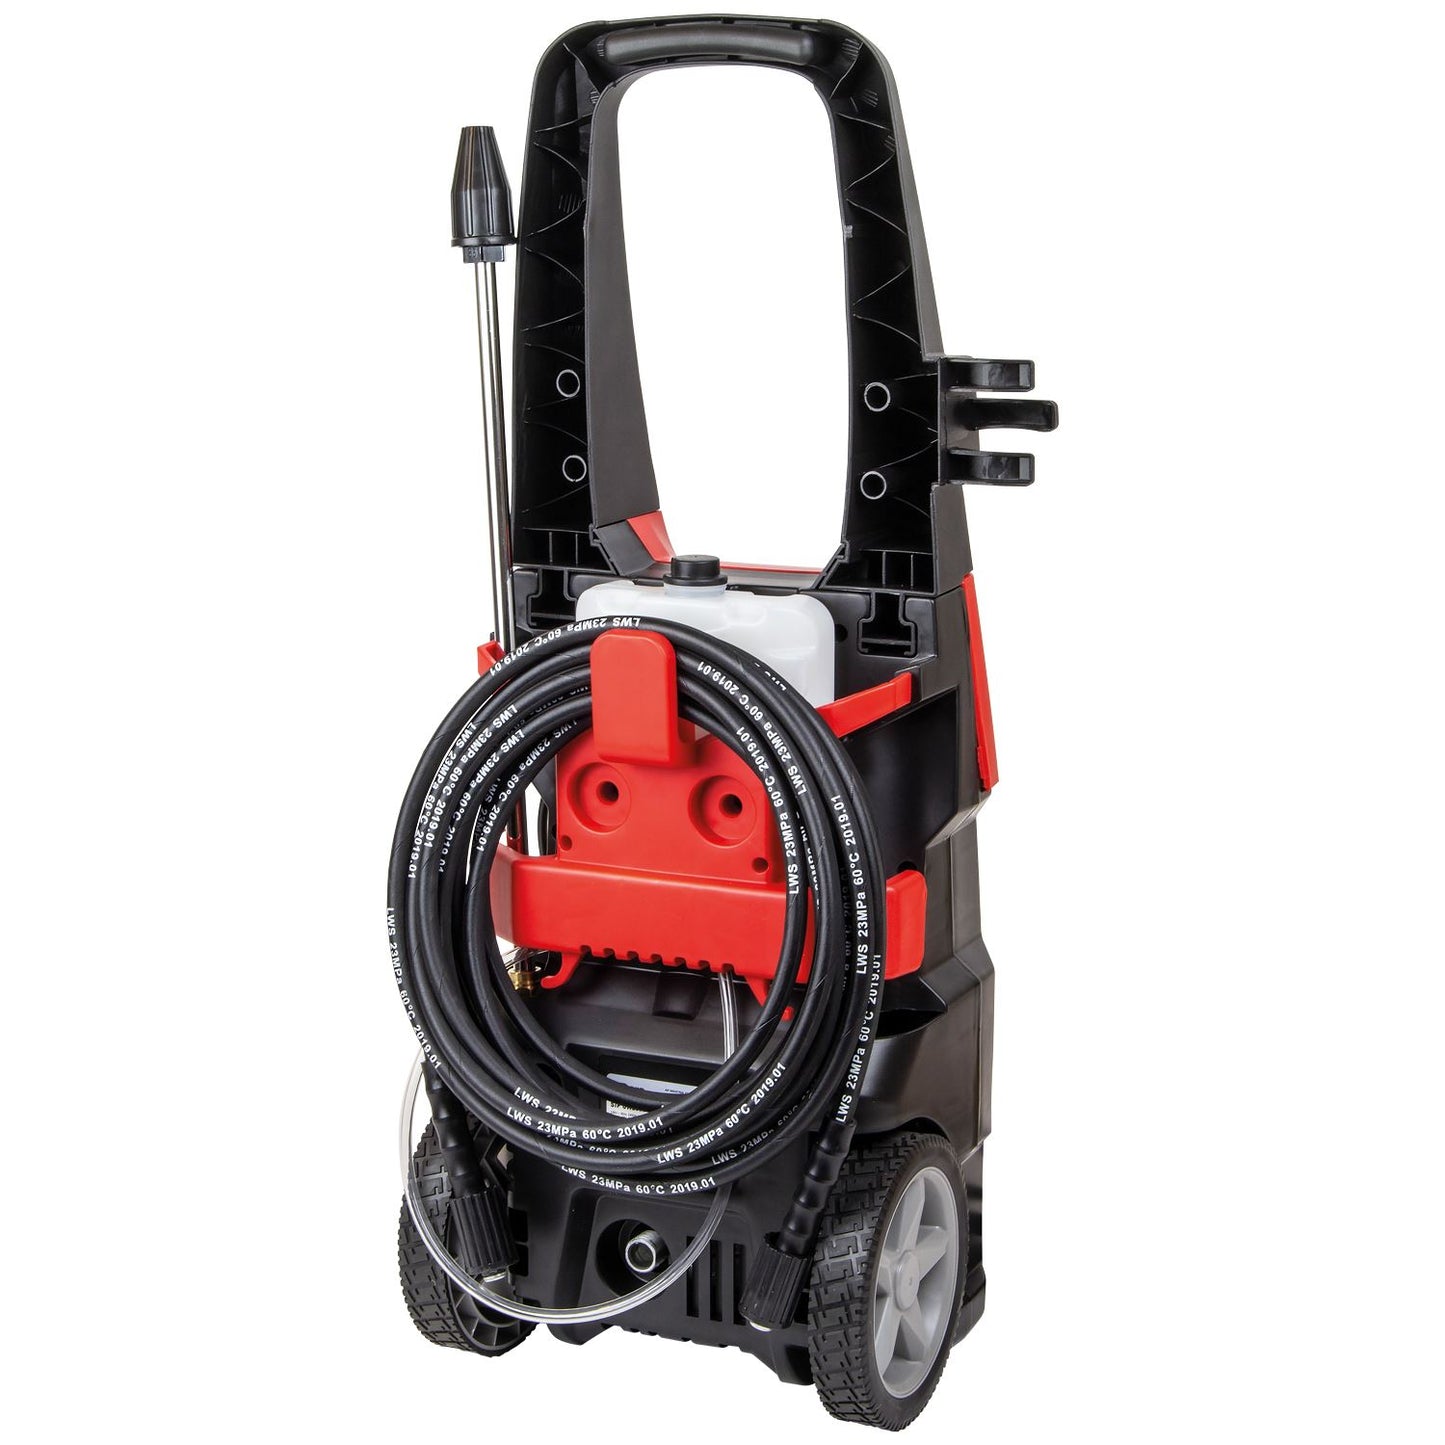 SIP Industrial CW2300 Electric Pressure Washer